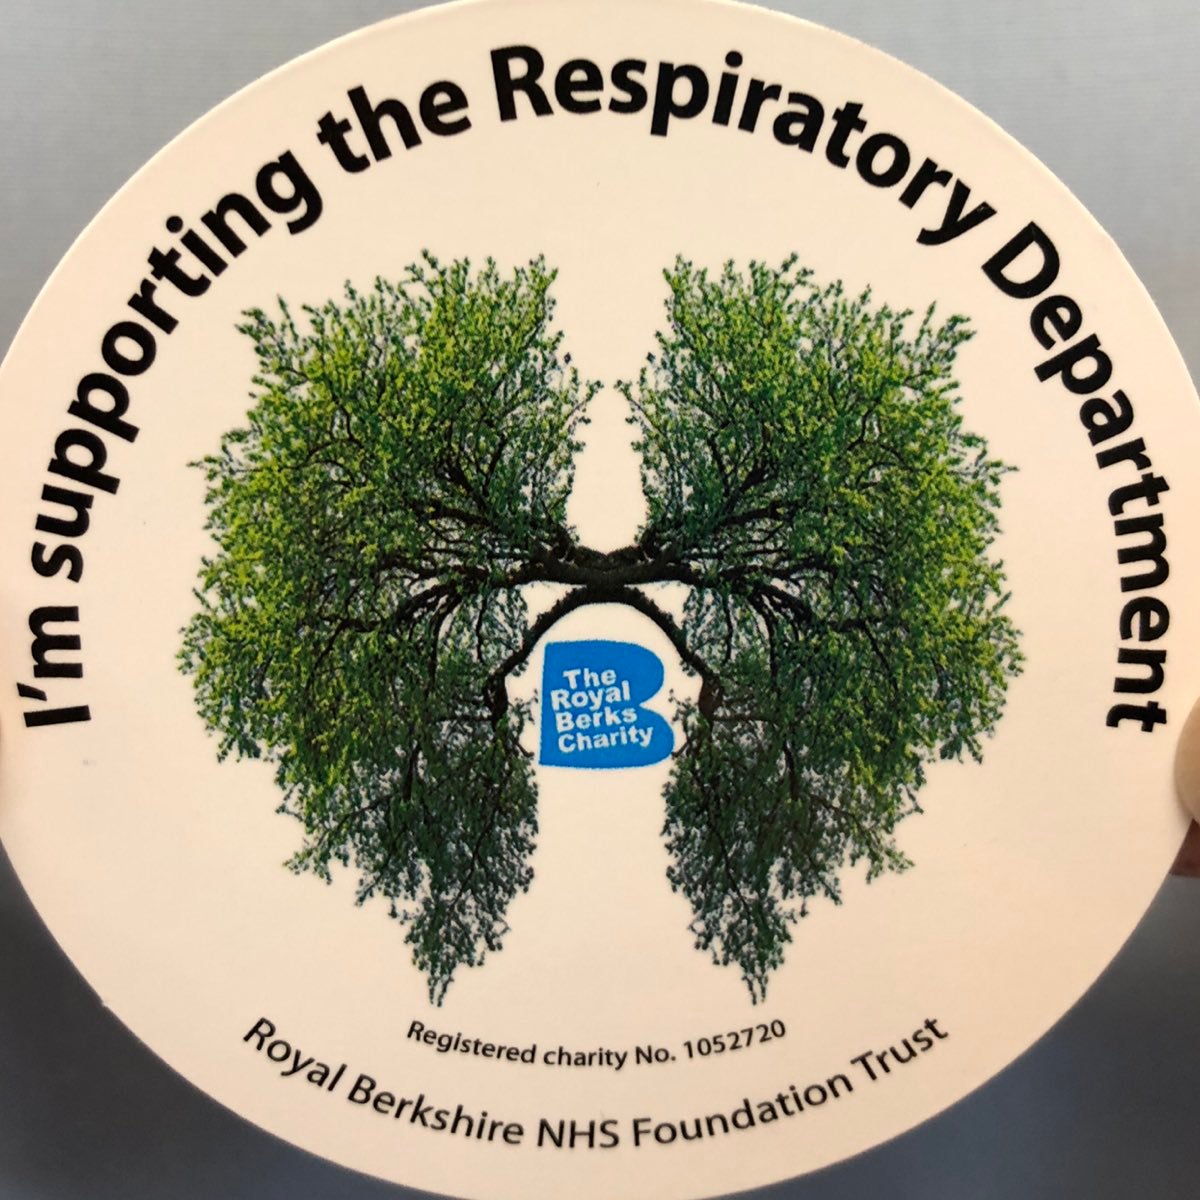 Royal Berkshire NHS Foundation Trust (RBFT) Respiratory Department. Tweets by Frankie Knight, Respiratory Physiotherapy and the Respiratory Physiology team